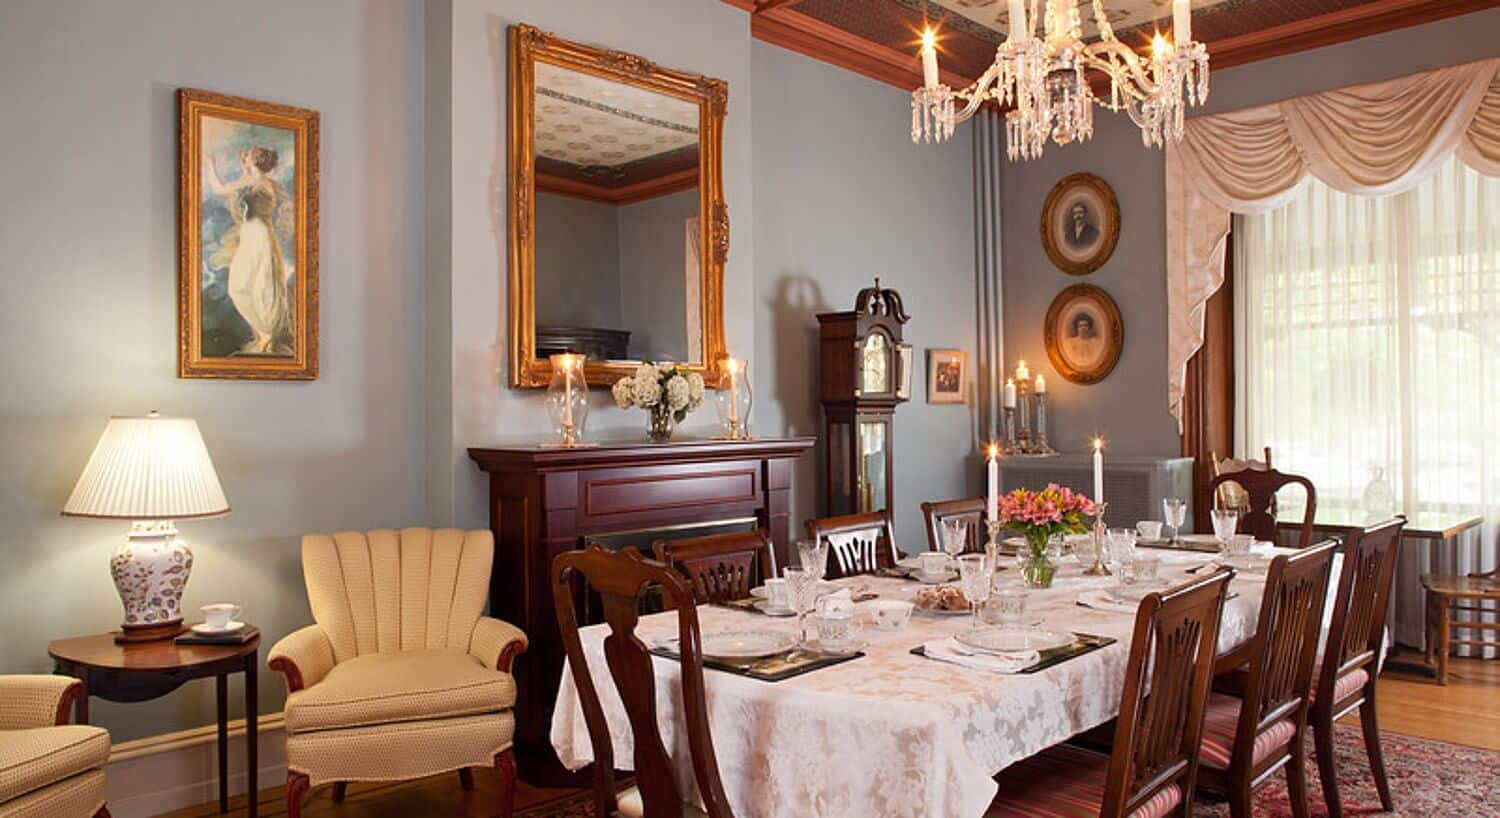 Large dining room with table set for eight, chandelier above and sitting chairs next to brown fireplace